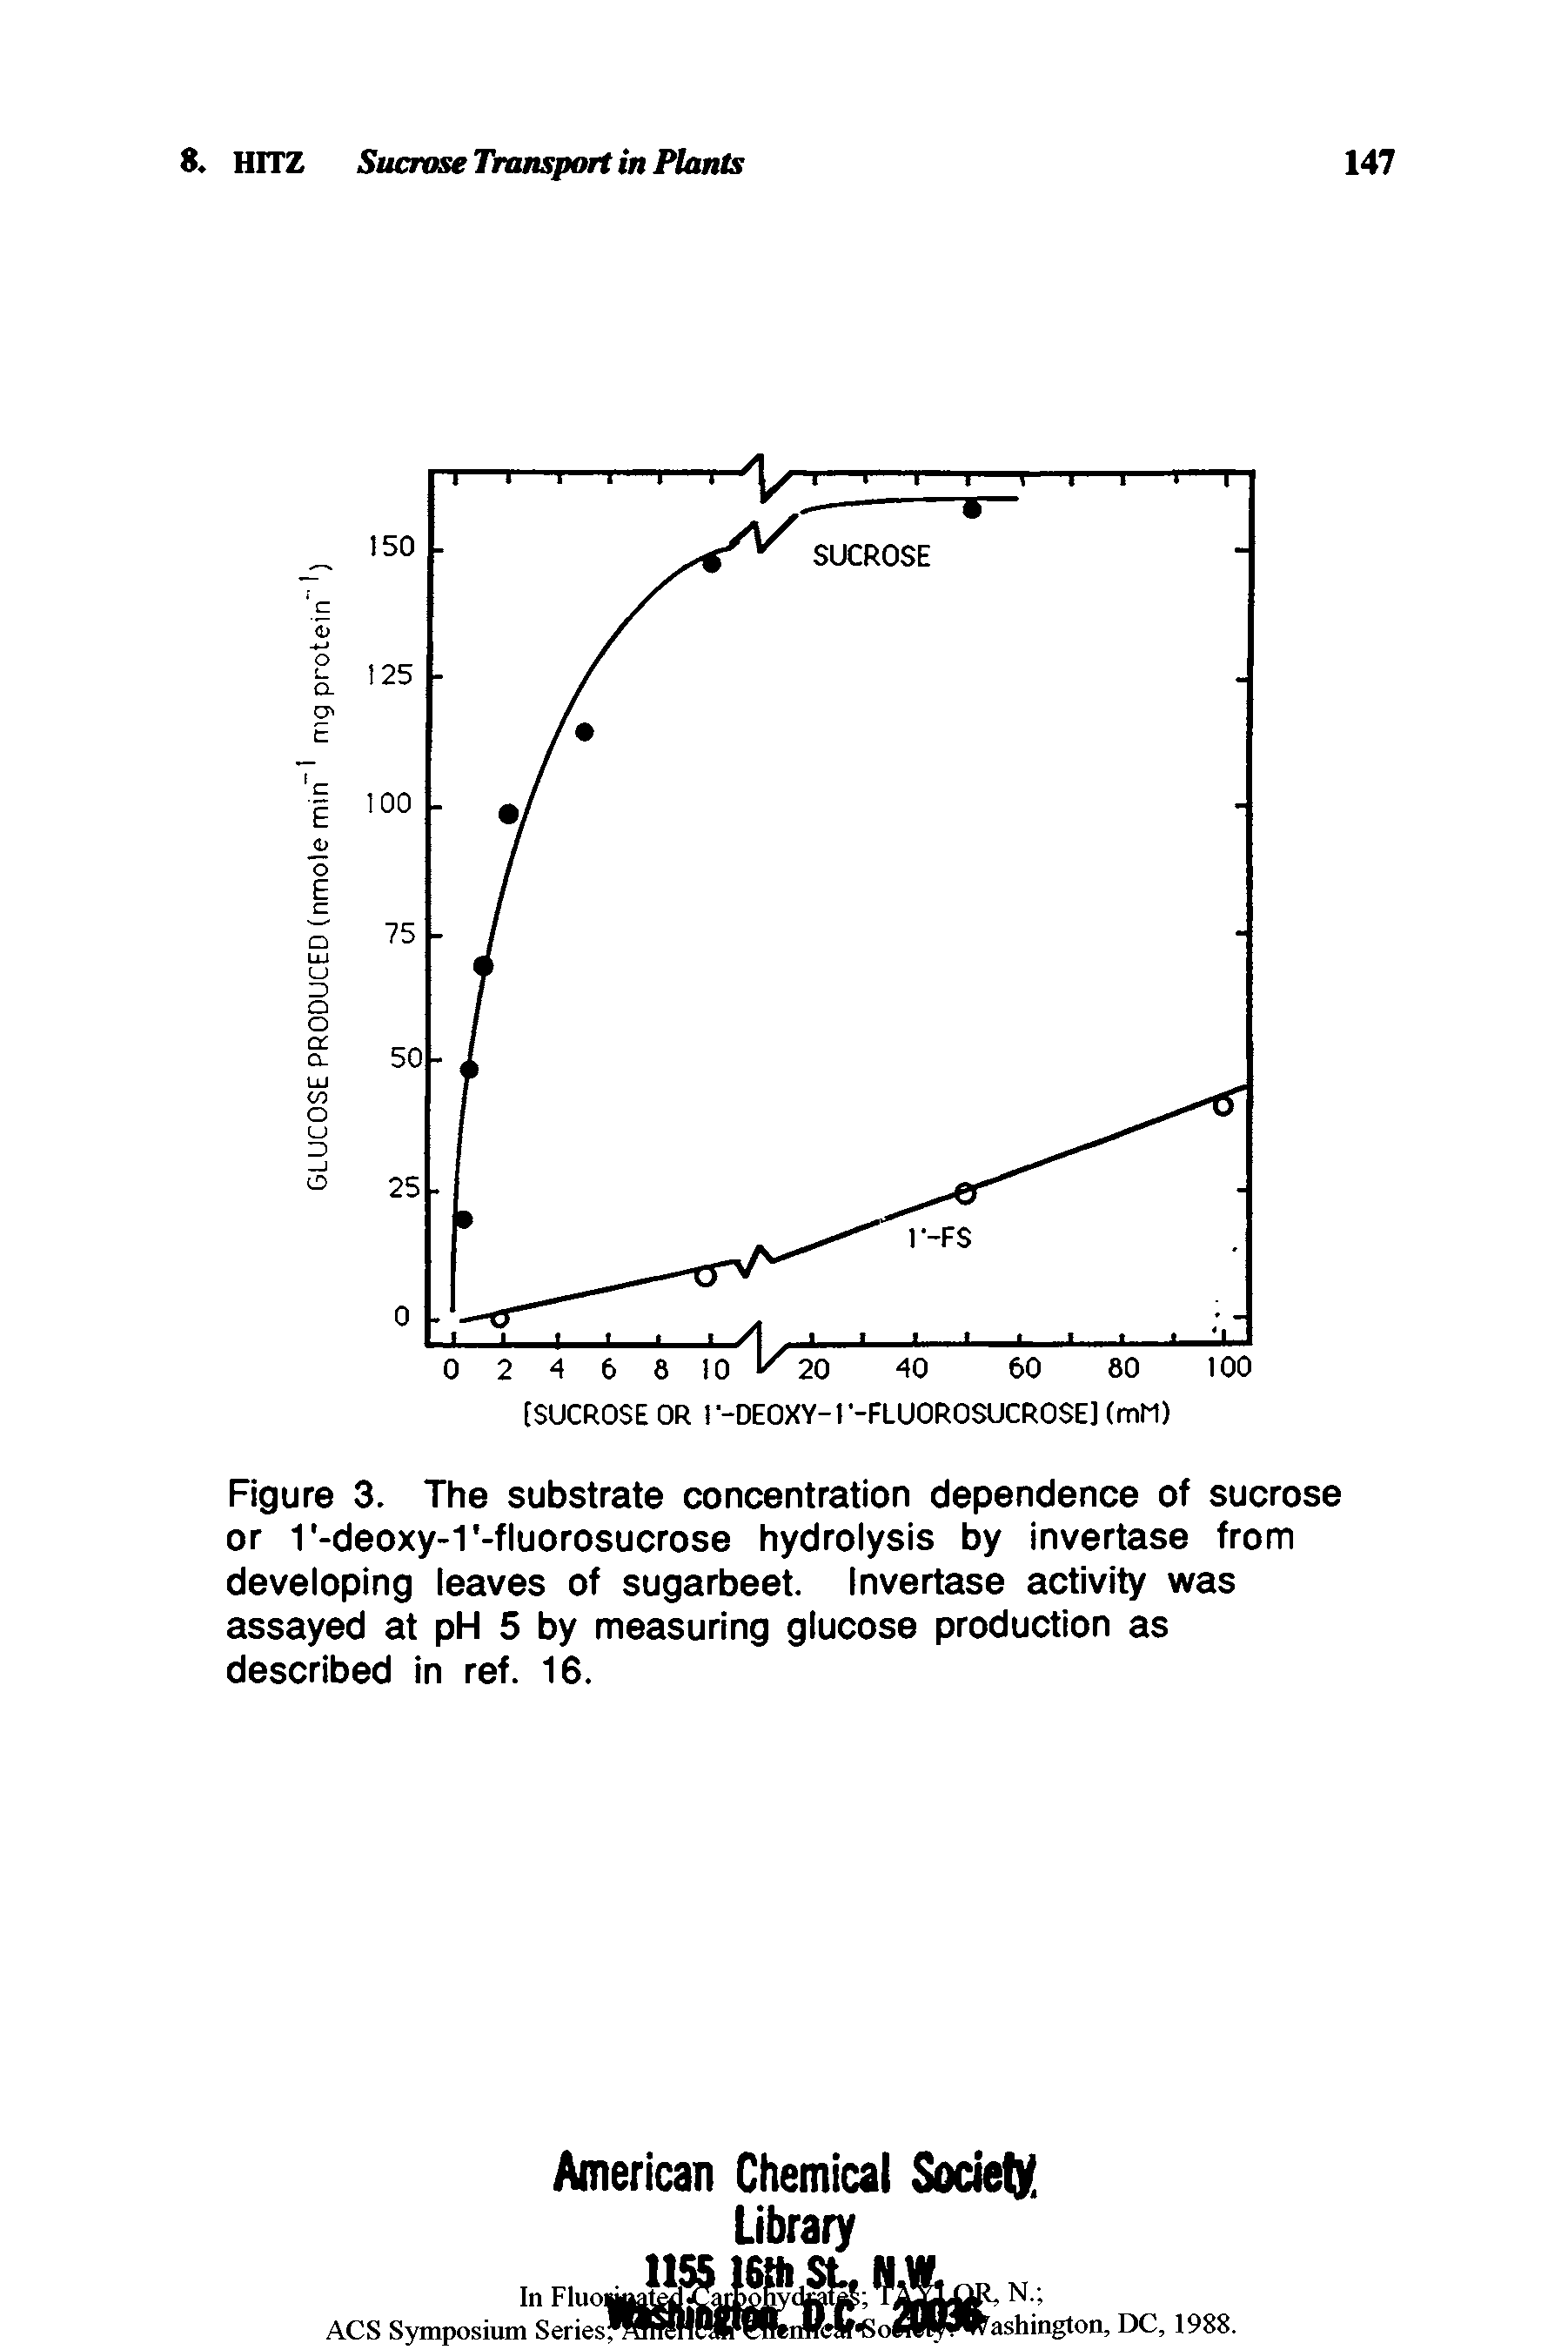 Figure 3. The substrate concentration dependence of sucrose or 1 -deoxy-1 -fluorosucrose hydrolysis by invertase from developing leaves of sugarbeet. Invertase activity was assayed at pH 5 by measuring glucose production as described in ref. 16.